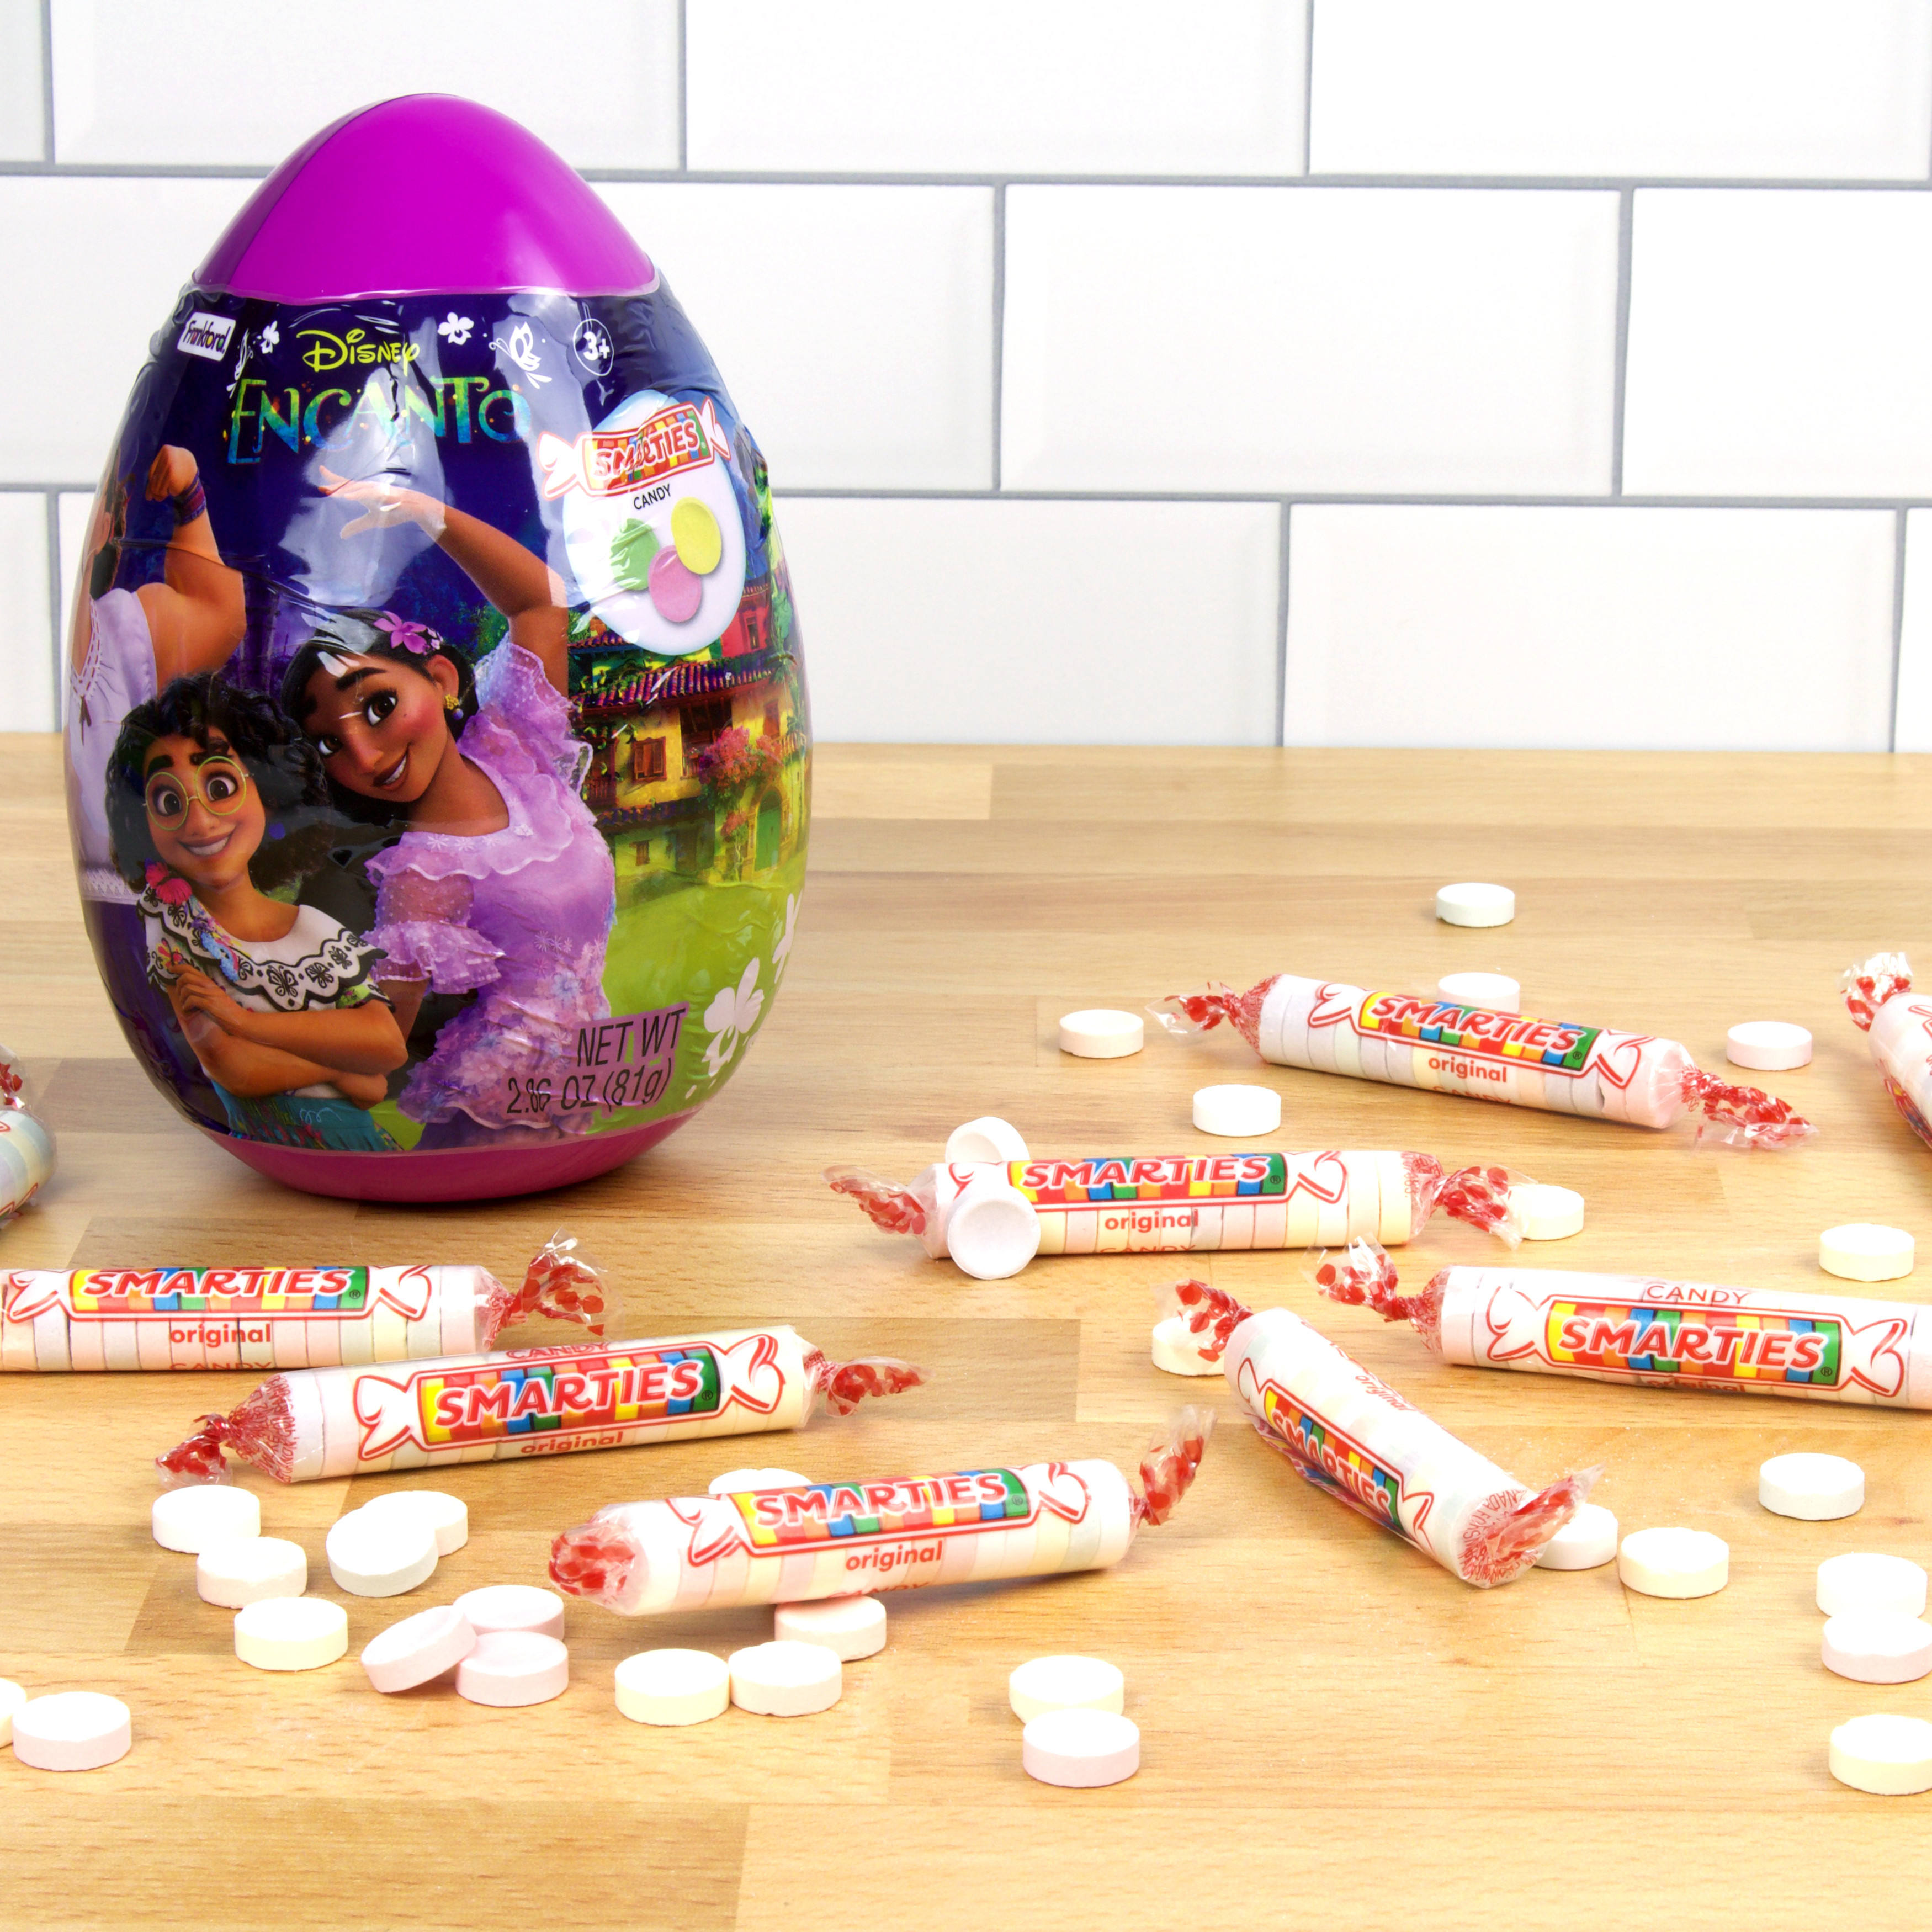 Frankford Disney Encanto Giant Easter Egg with Smarties Candy, 2.86 oz - image 5 of 6